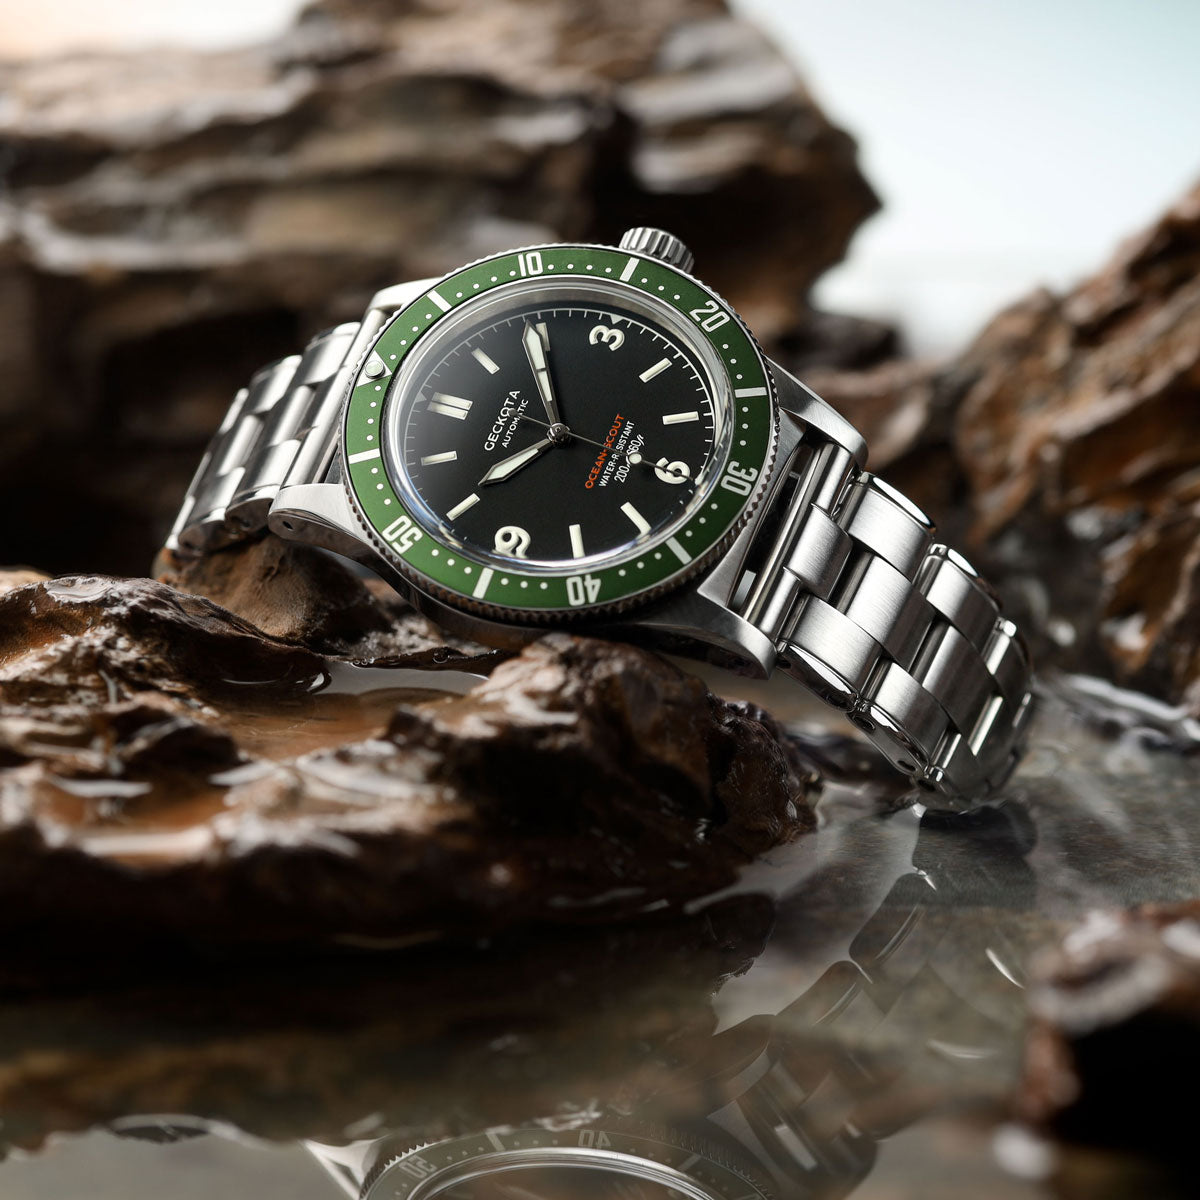 Geckota Ocean-Scout Dive Watch - Emerald Green - Berwick Stainless Steel Strap - additional image 3